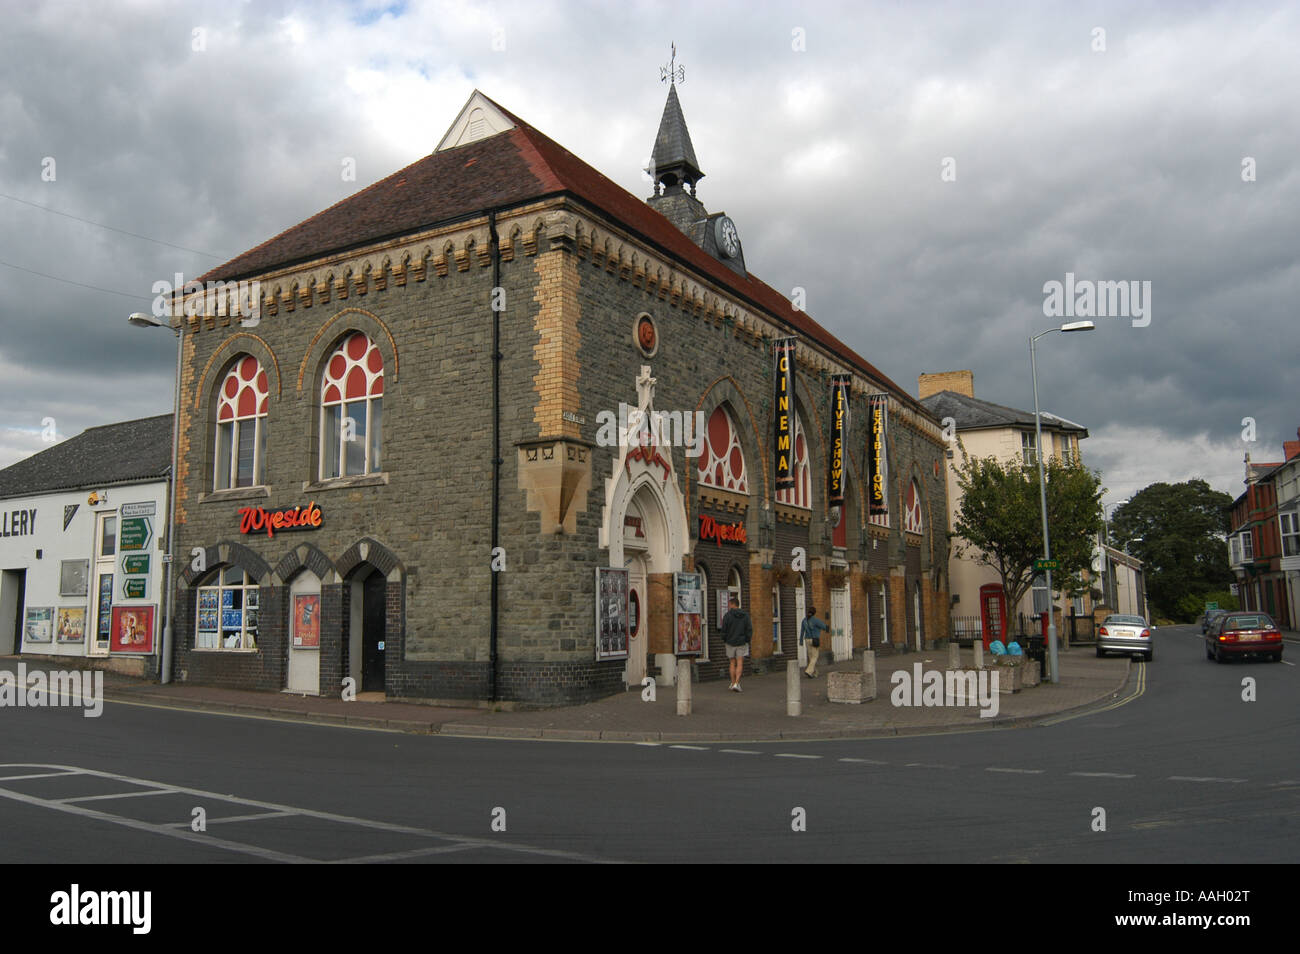 The Wyeside arts centre Builth Wells Powys mid wales exterior overcast grey day, UK Stock Photo